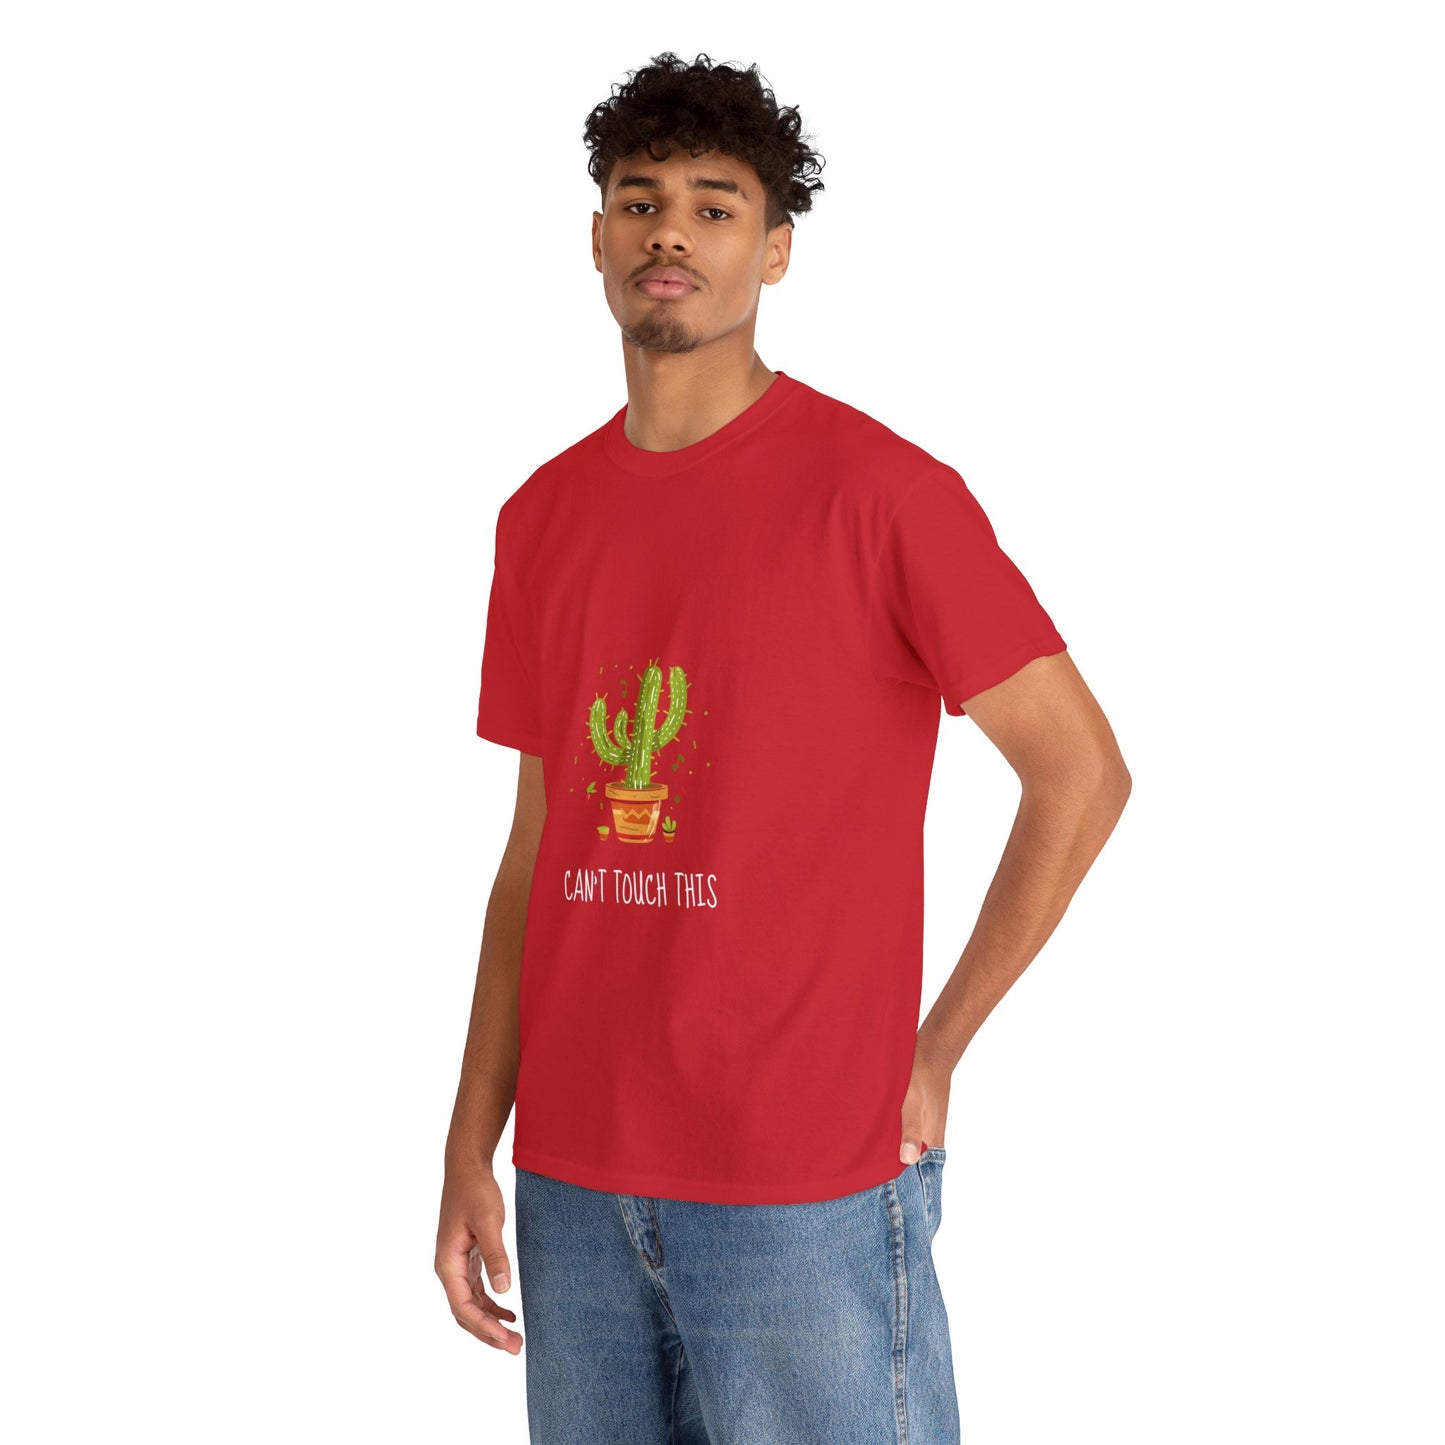 "Can't Touch This" Dancing Cactus Shirt | unisex